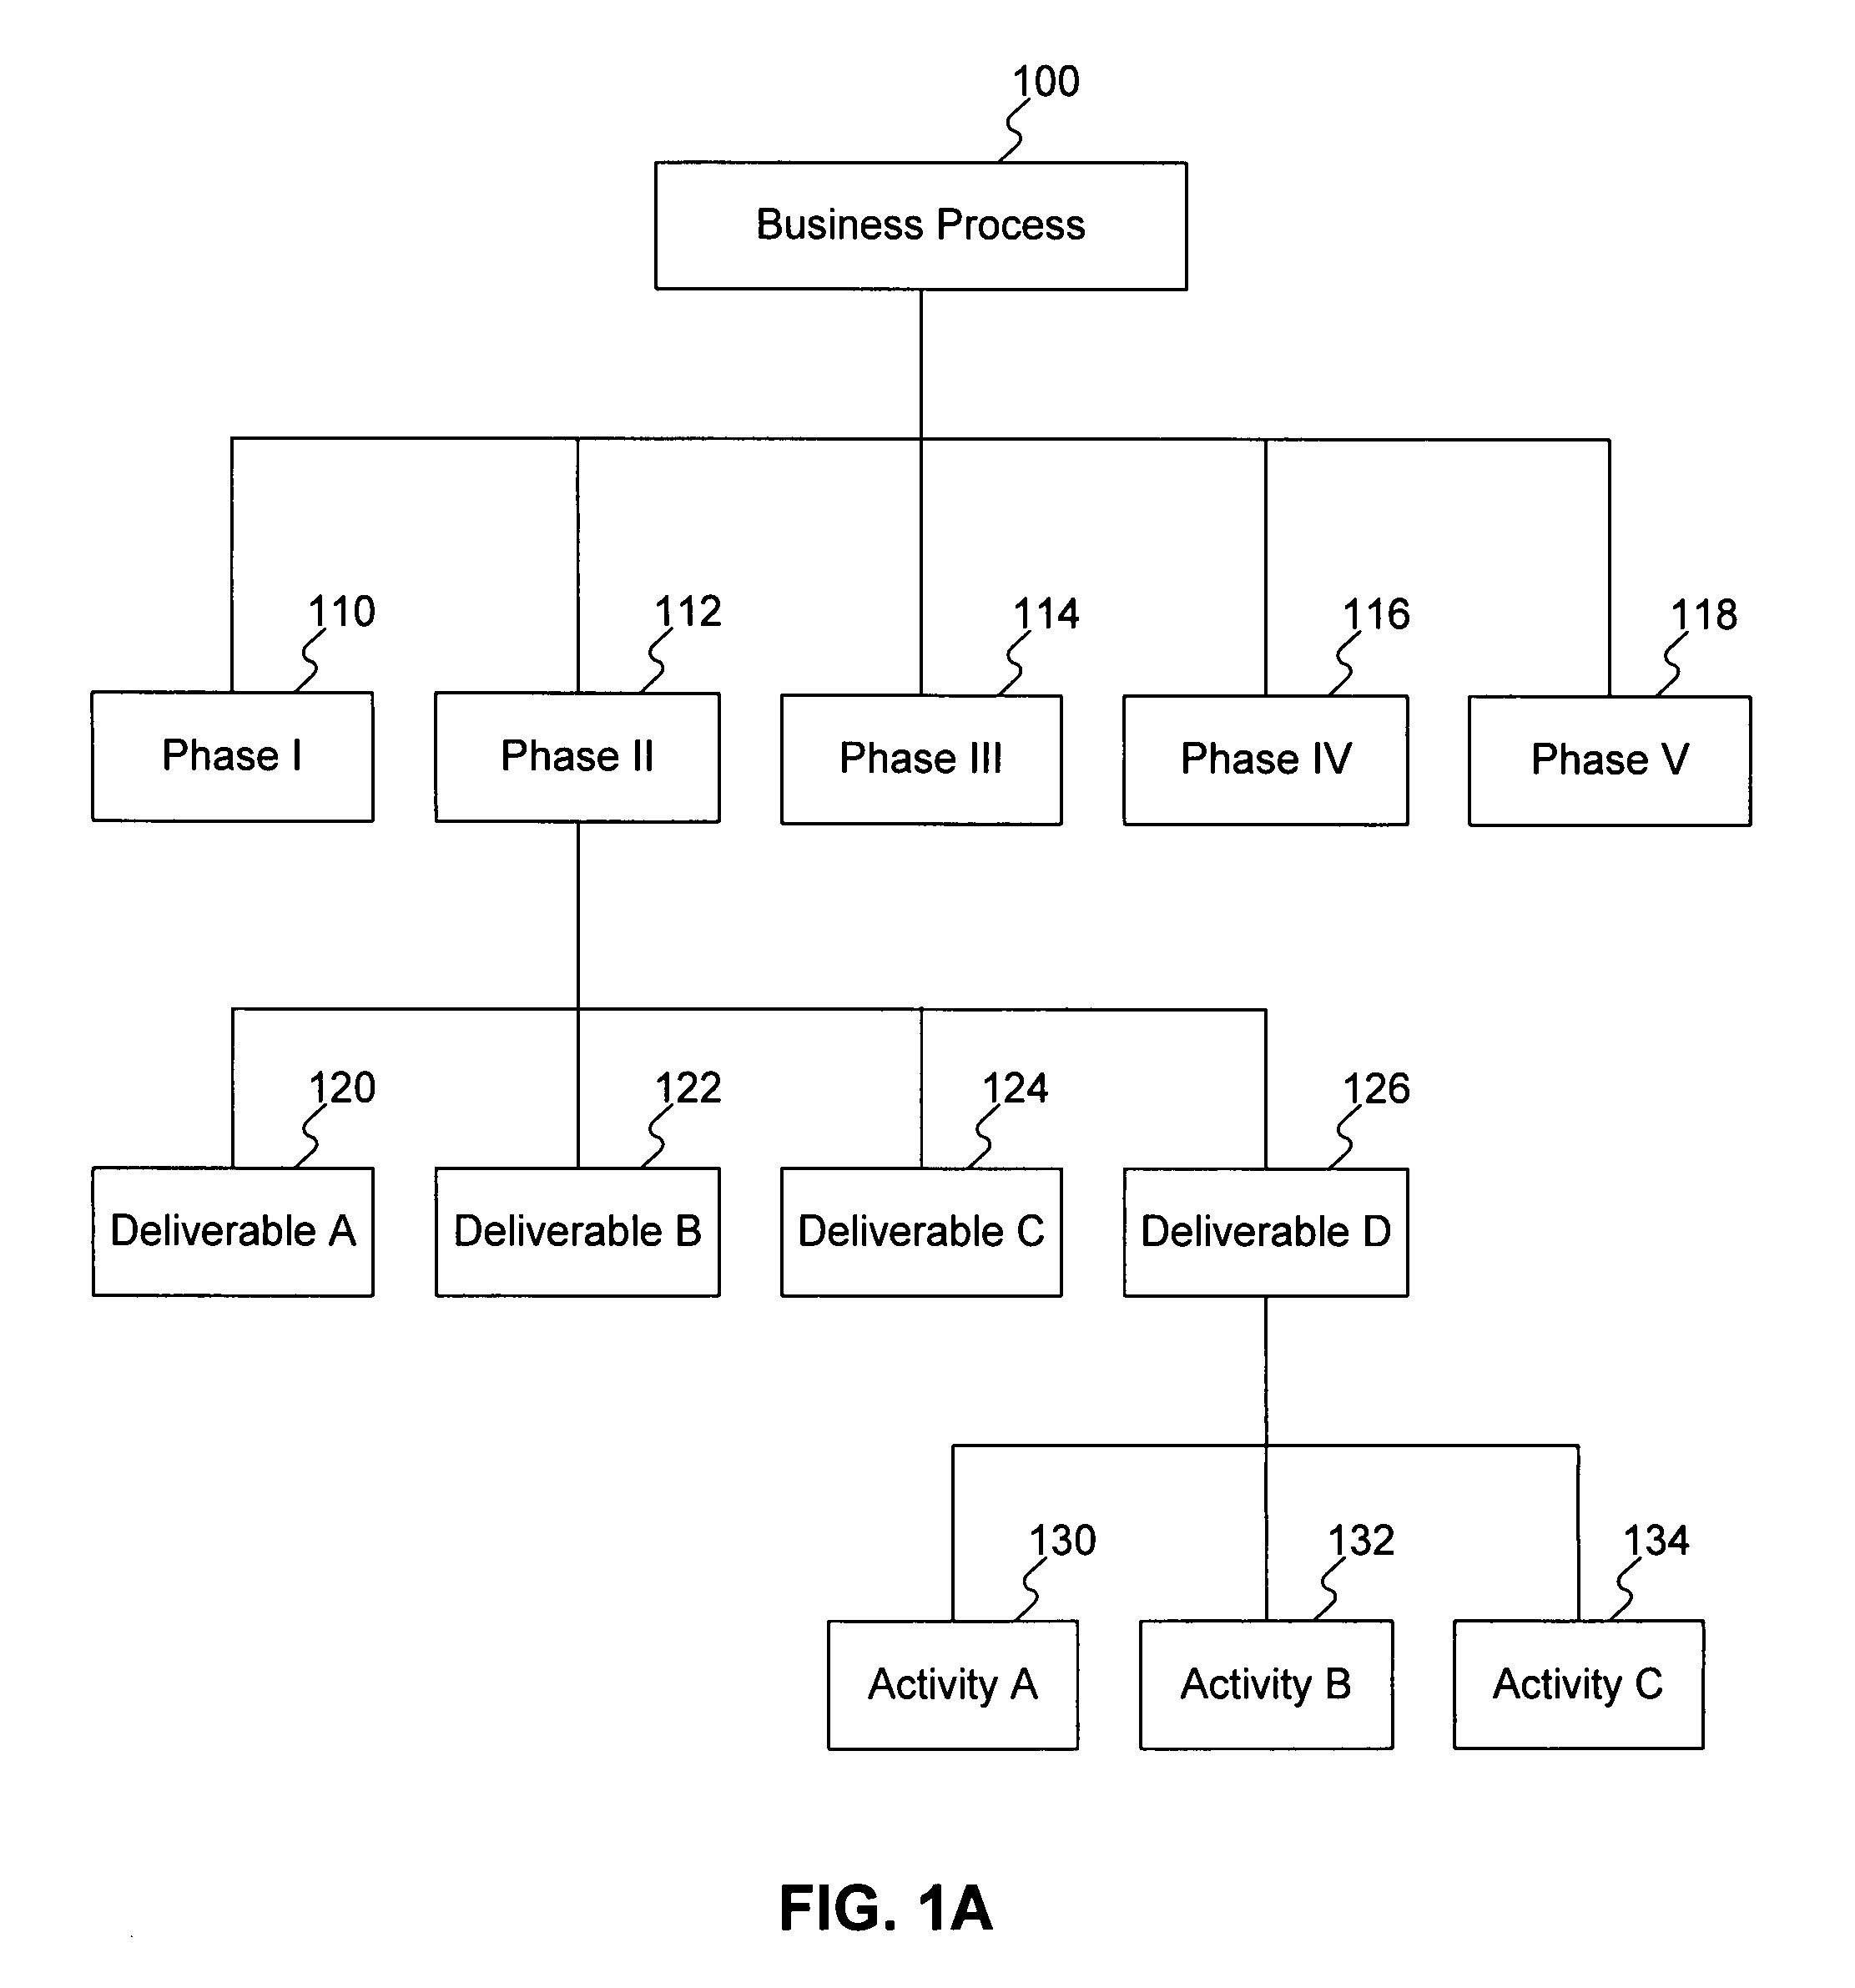 Systems and methods for assessing the level of conformance of a business process